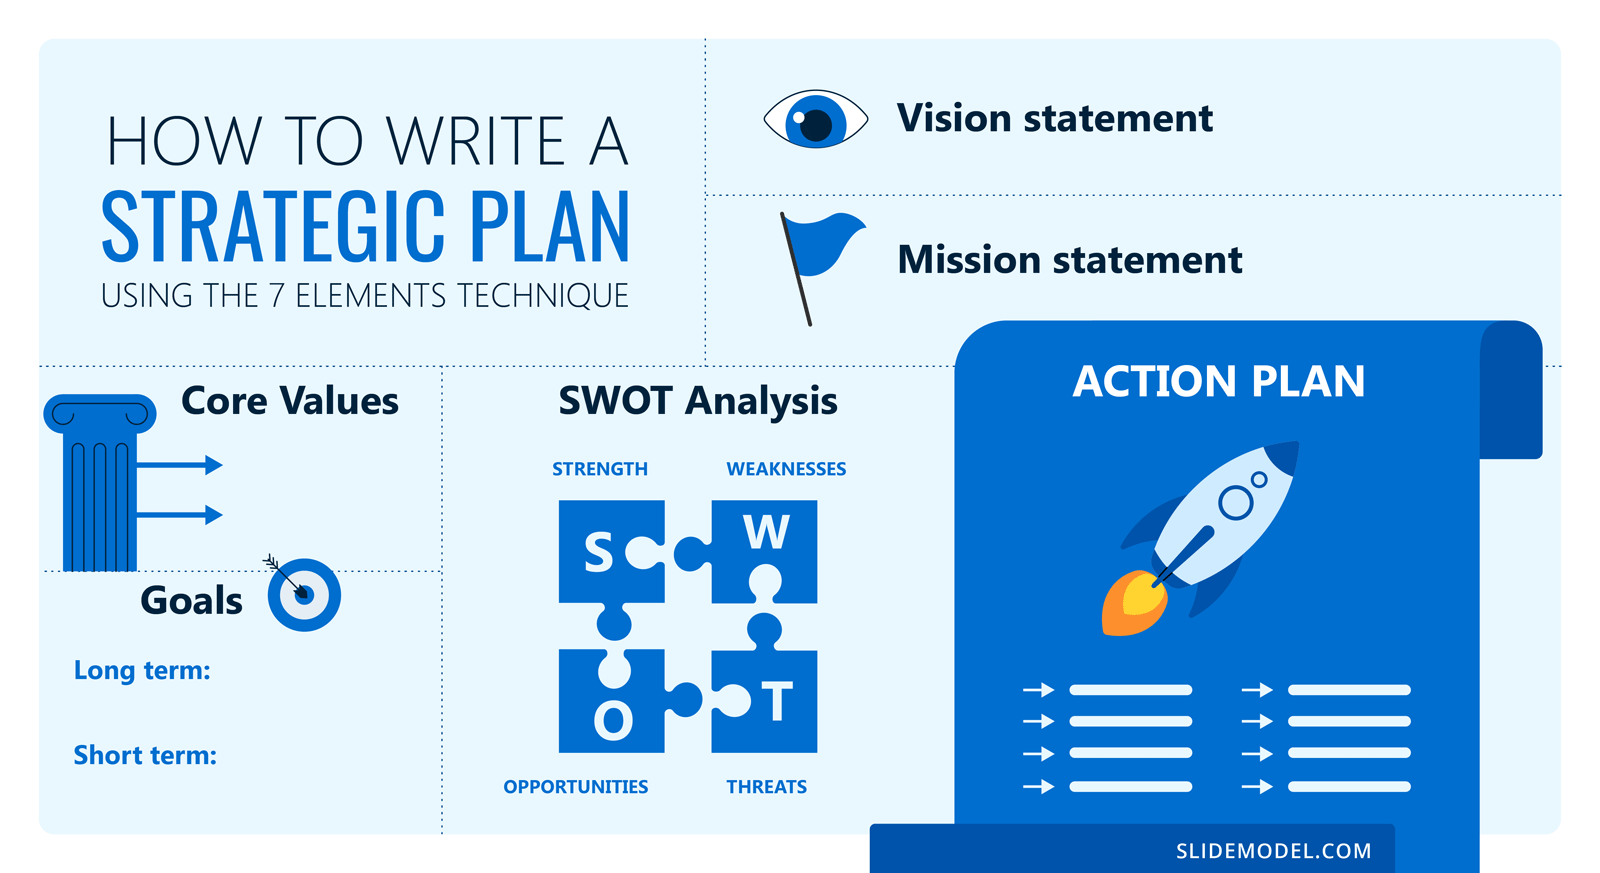 How to Write a Strategic Plan Using The 7 Elements Technique